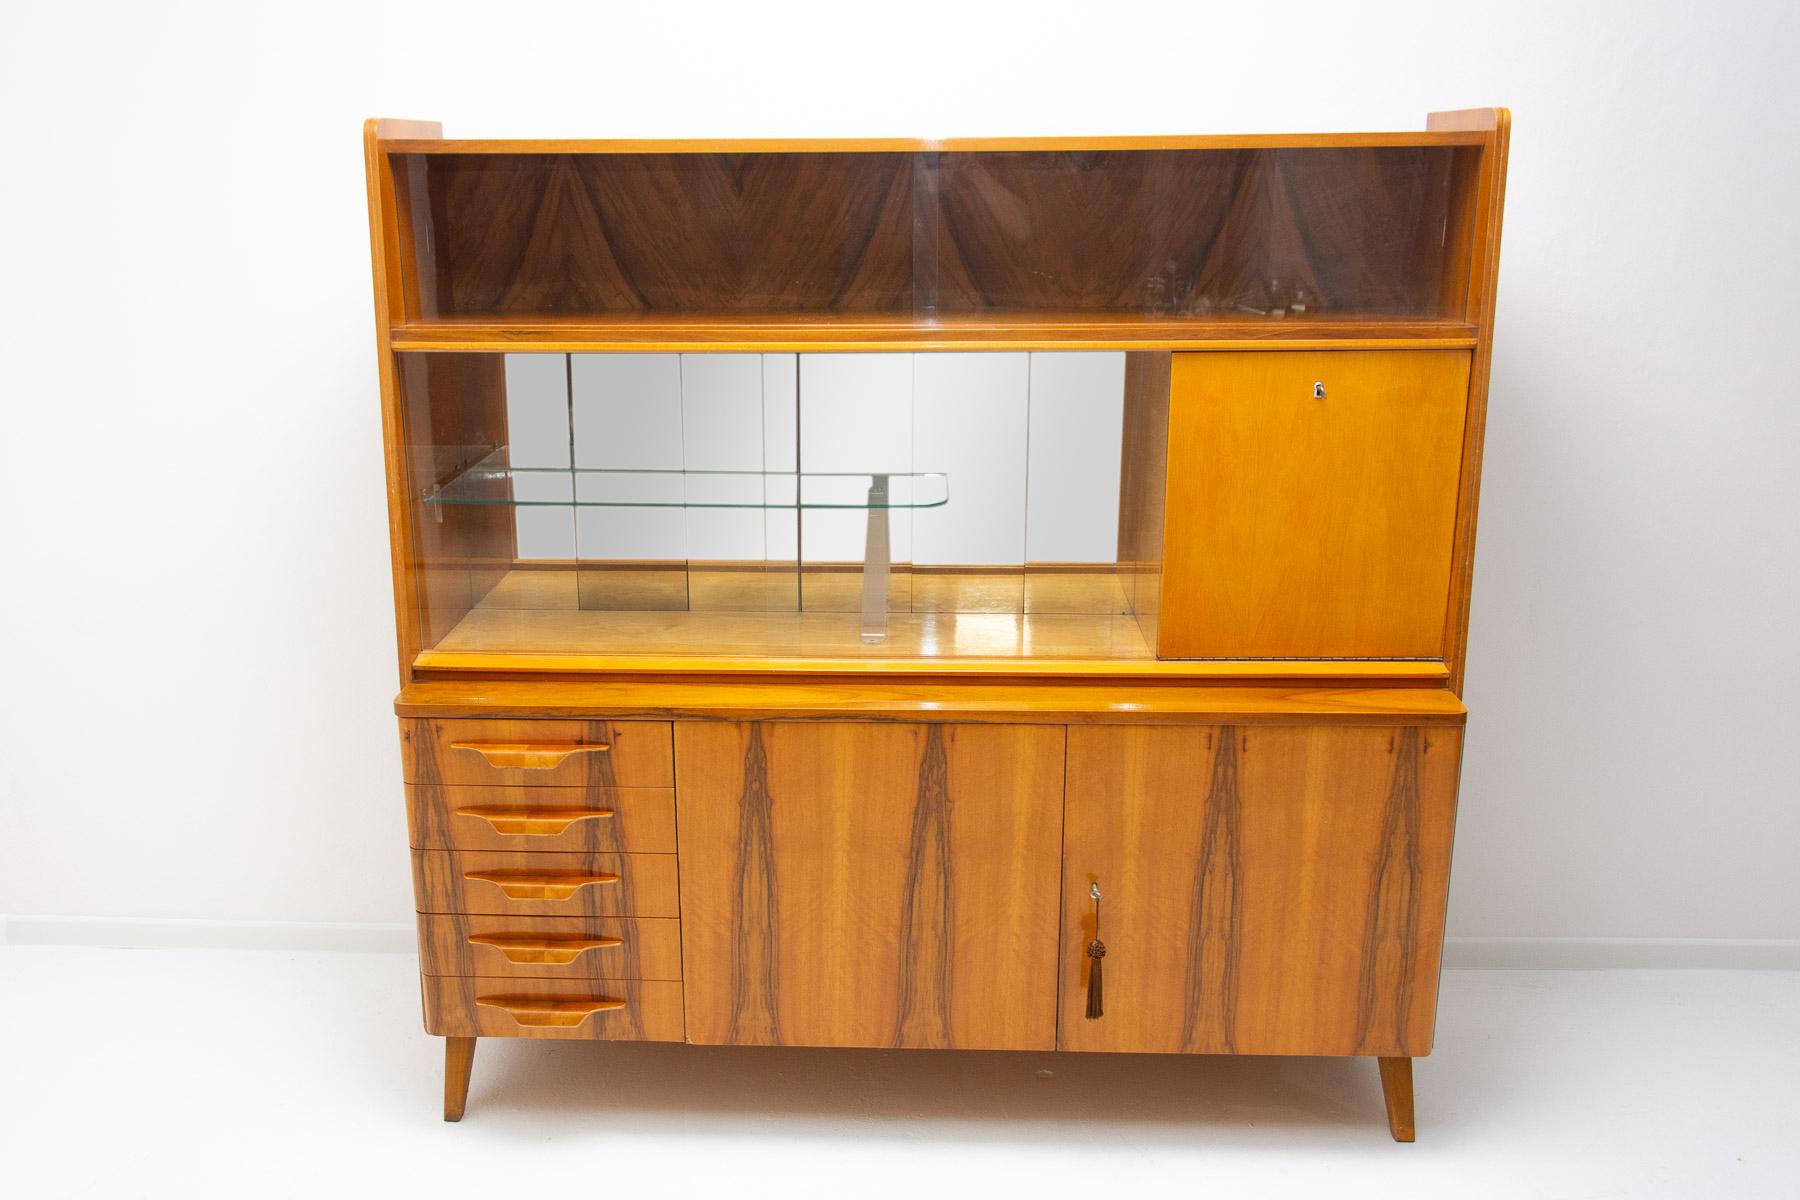 Mid century Vintage credenza or sideboard from the 1960´s. It was designed by František Jirák and was manufactured by Tatra nábytok company in the former Czechoslovakia. Features a simple design, a glazed section can be used as a bar, bookcase etc. 